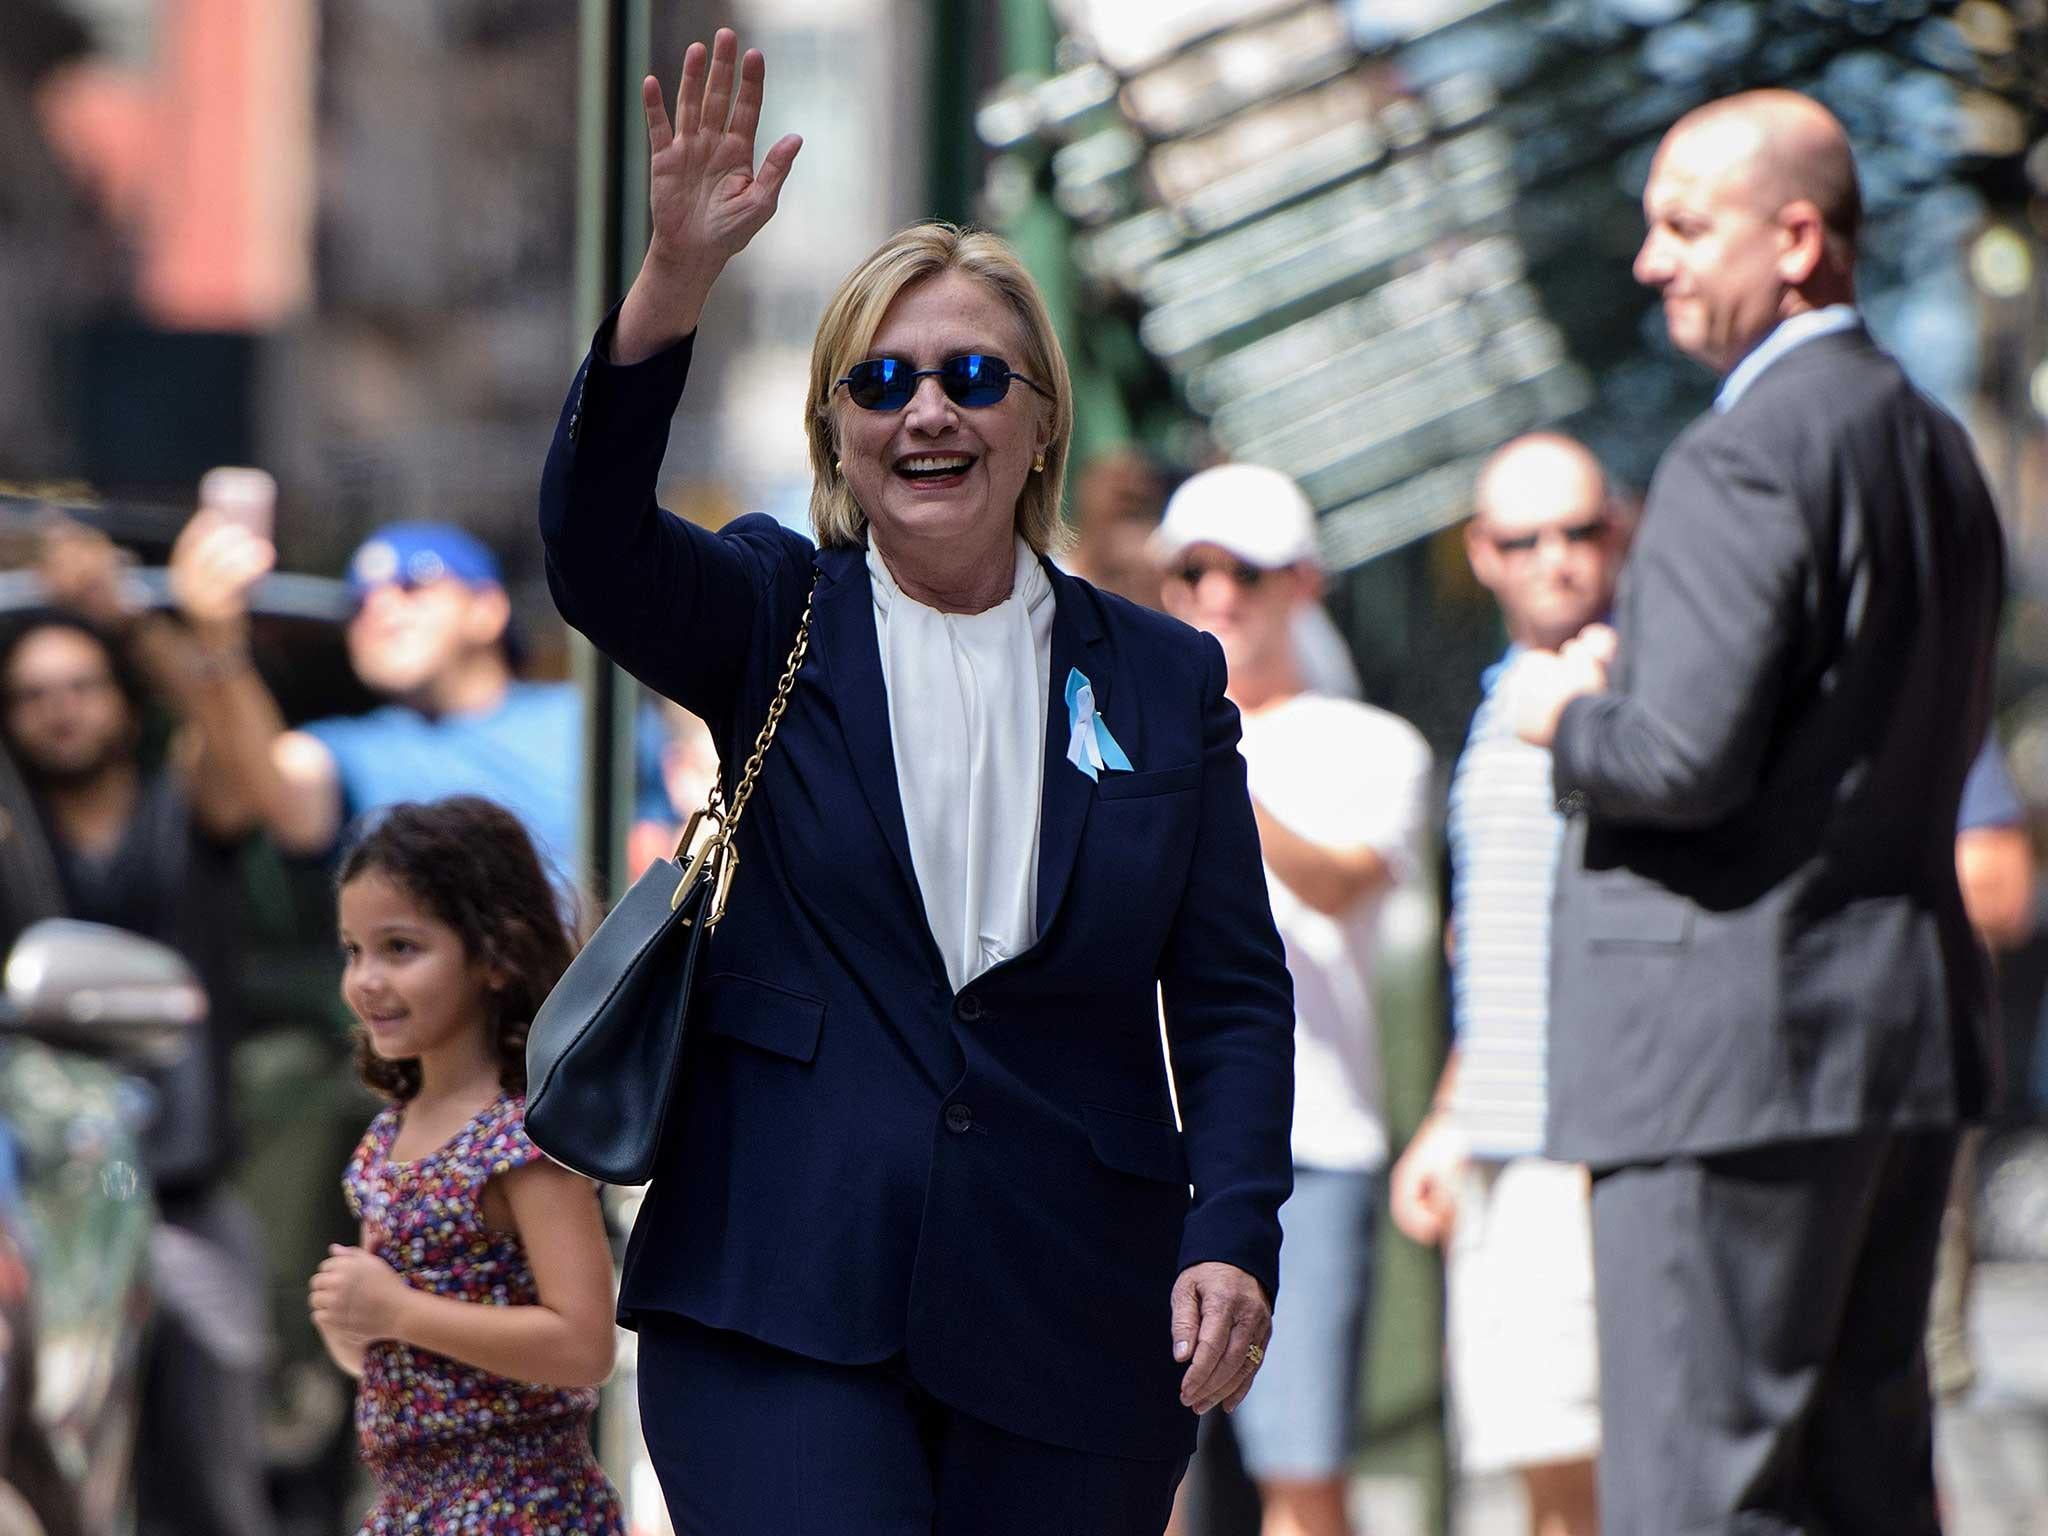 Hillary Clinton waves to the press as she leaves her daughter's apartment building in New York (Getty )